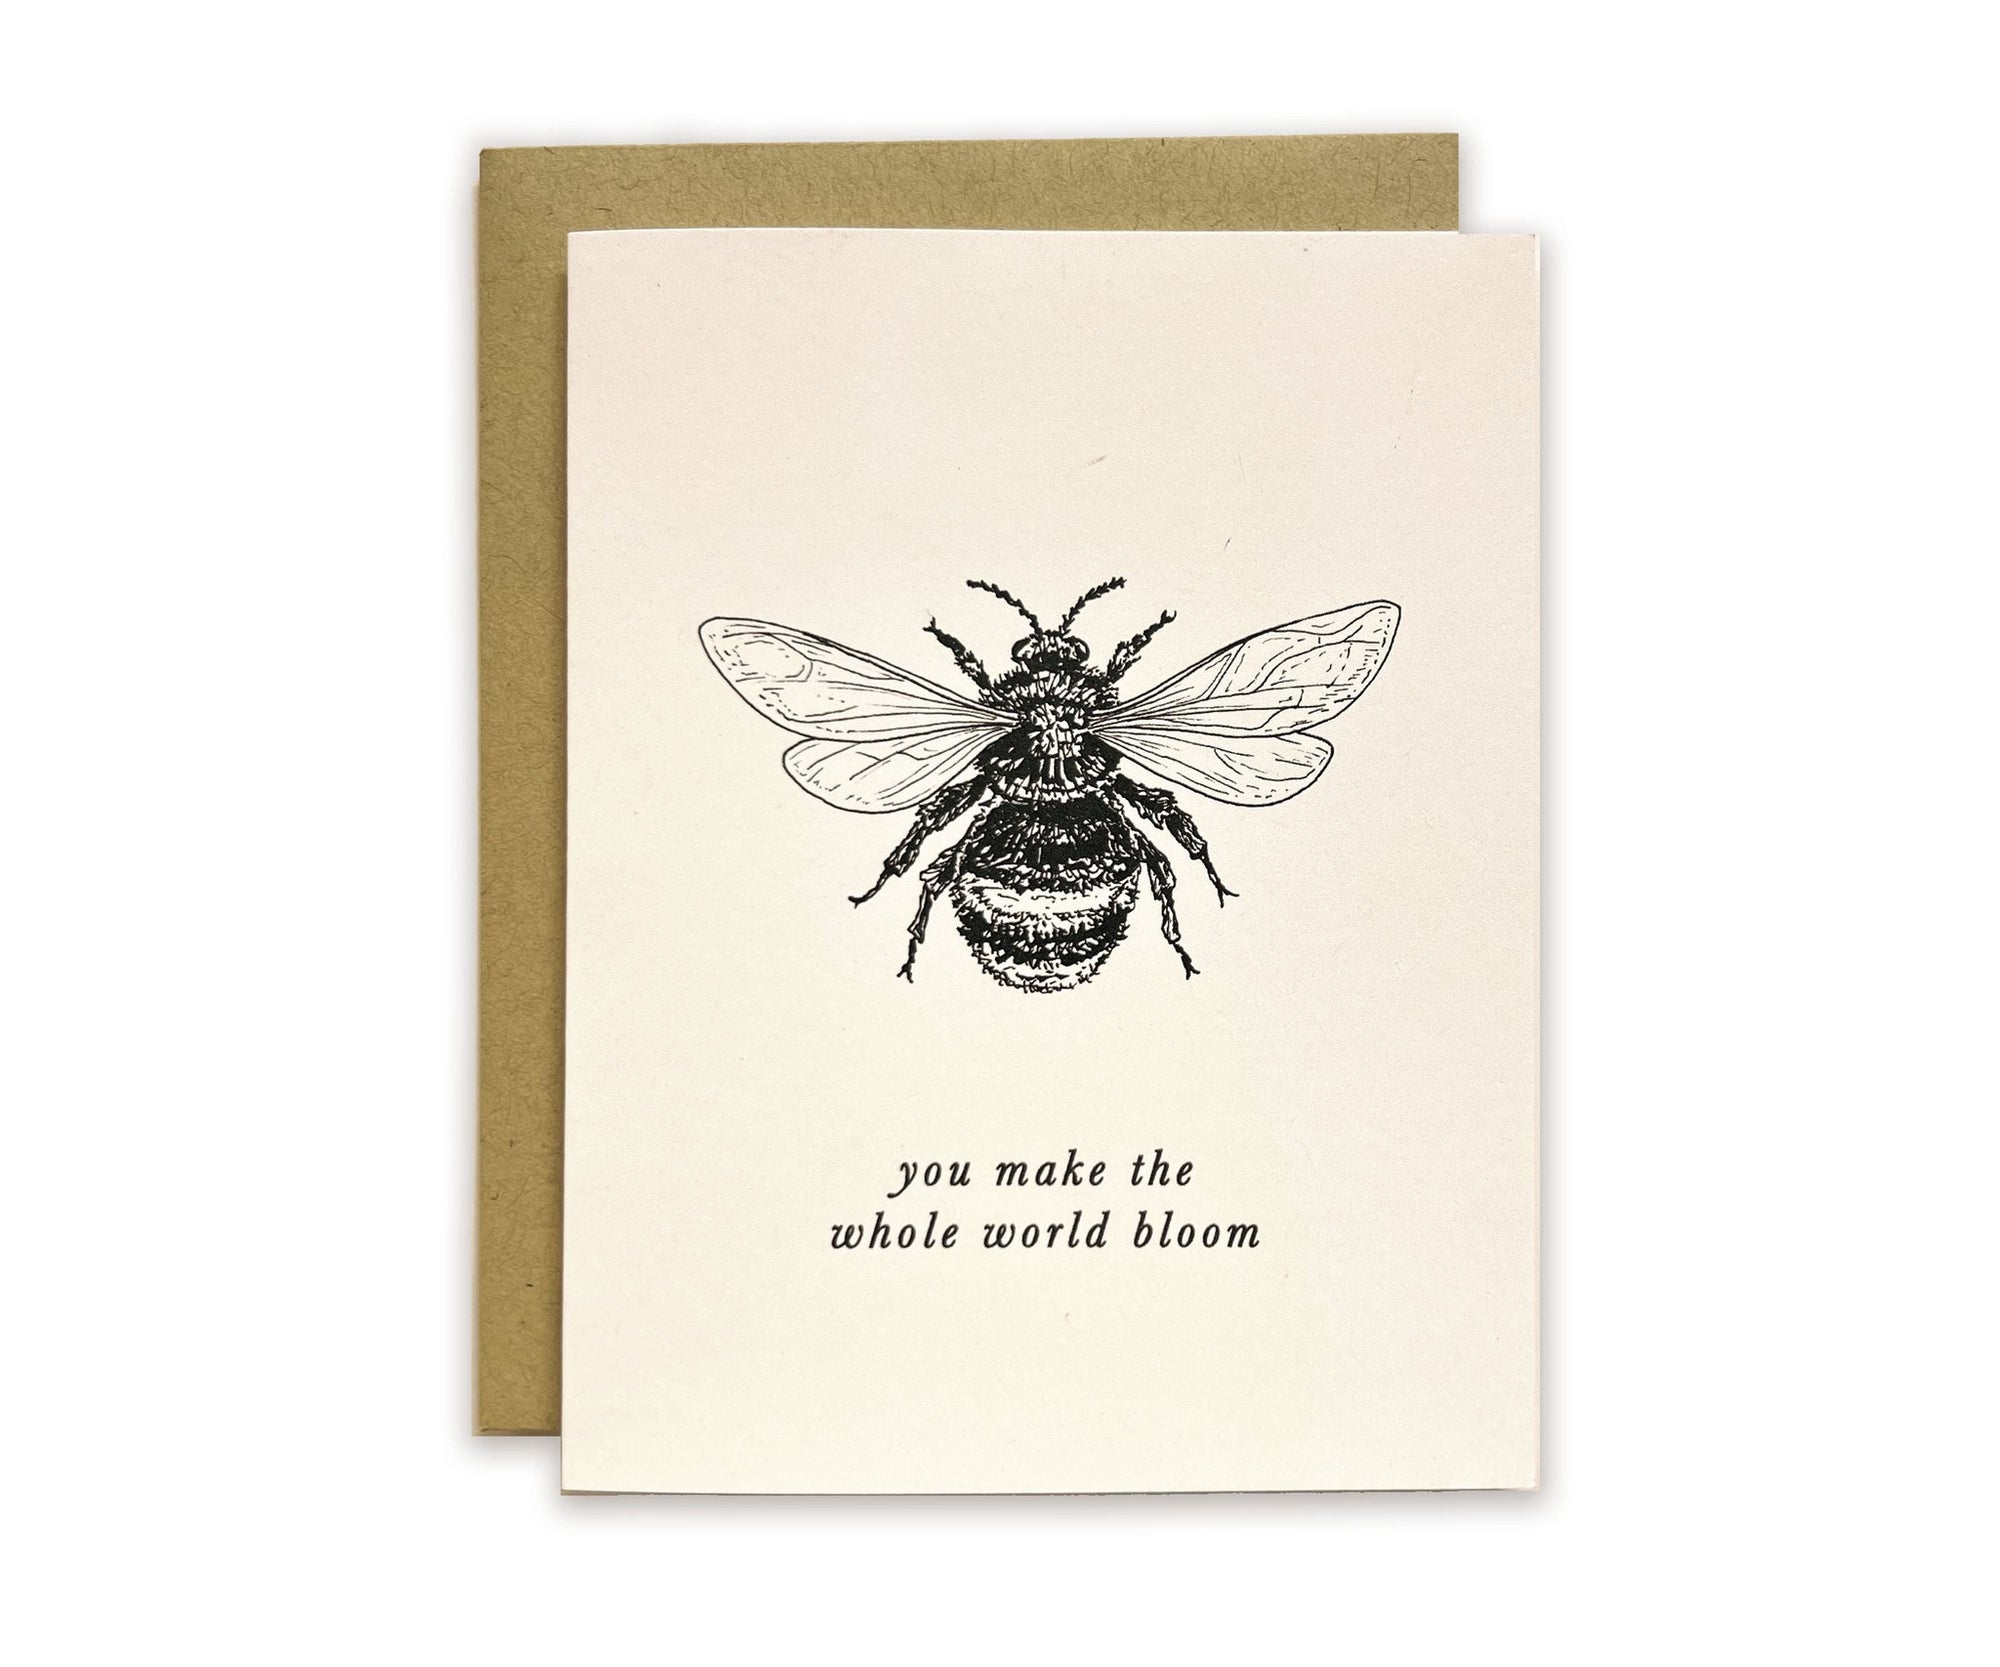 A card with an illustration of a bee and the words "You Make the Whole World Bloom" by The Wild Wander.